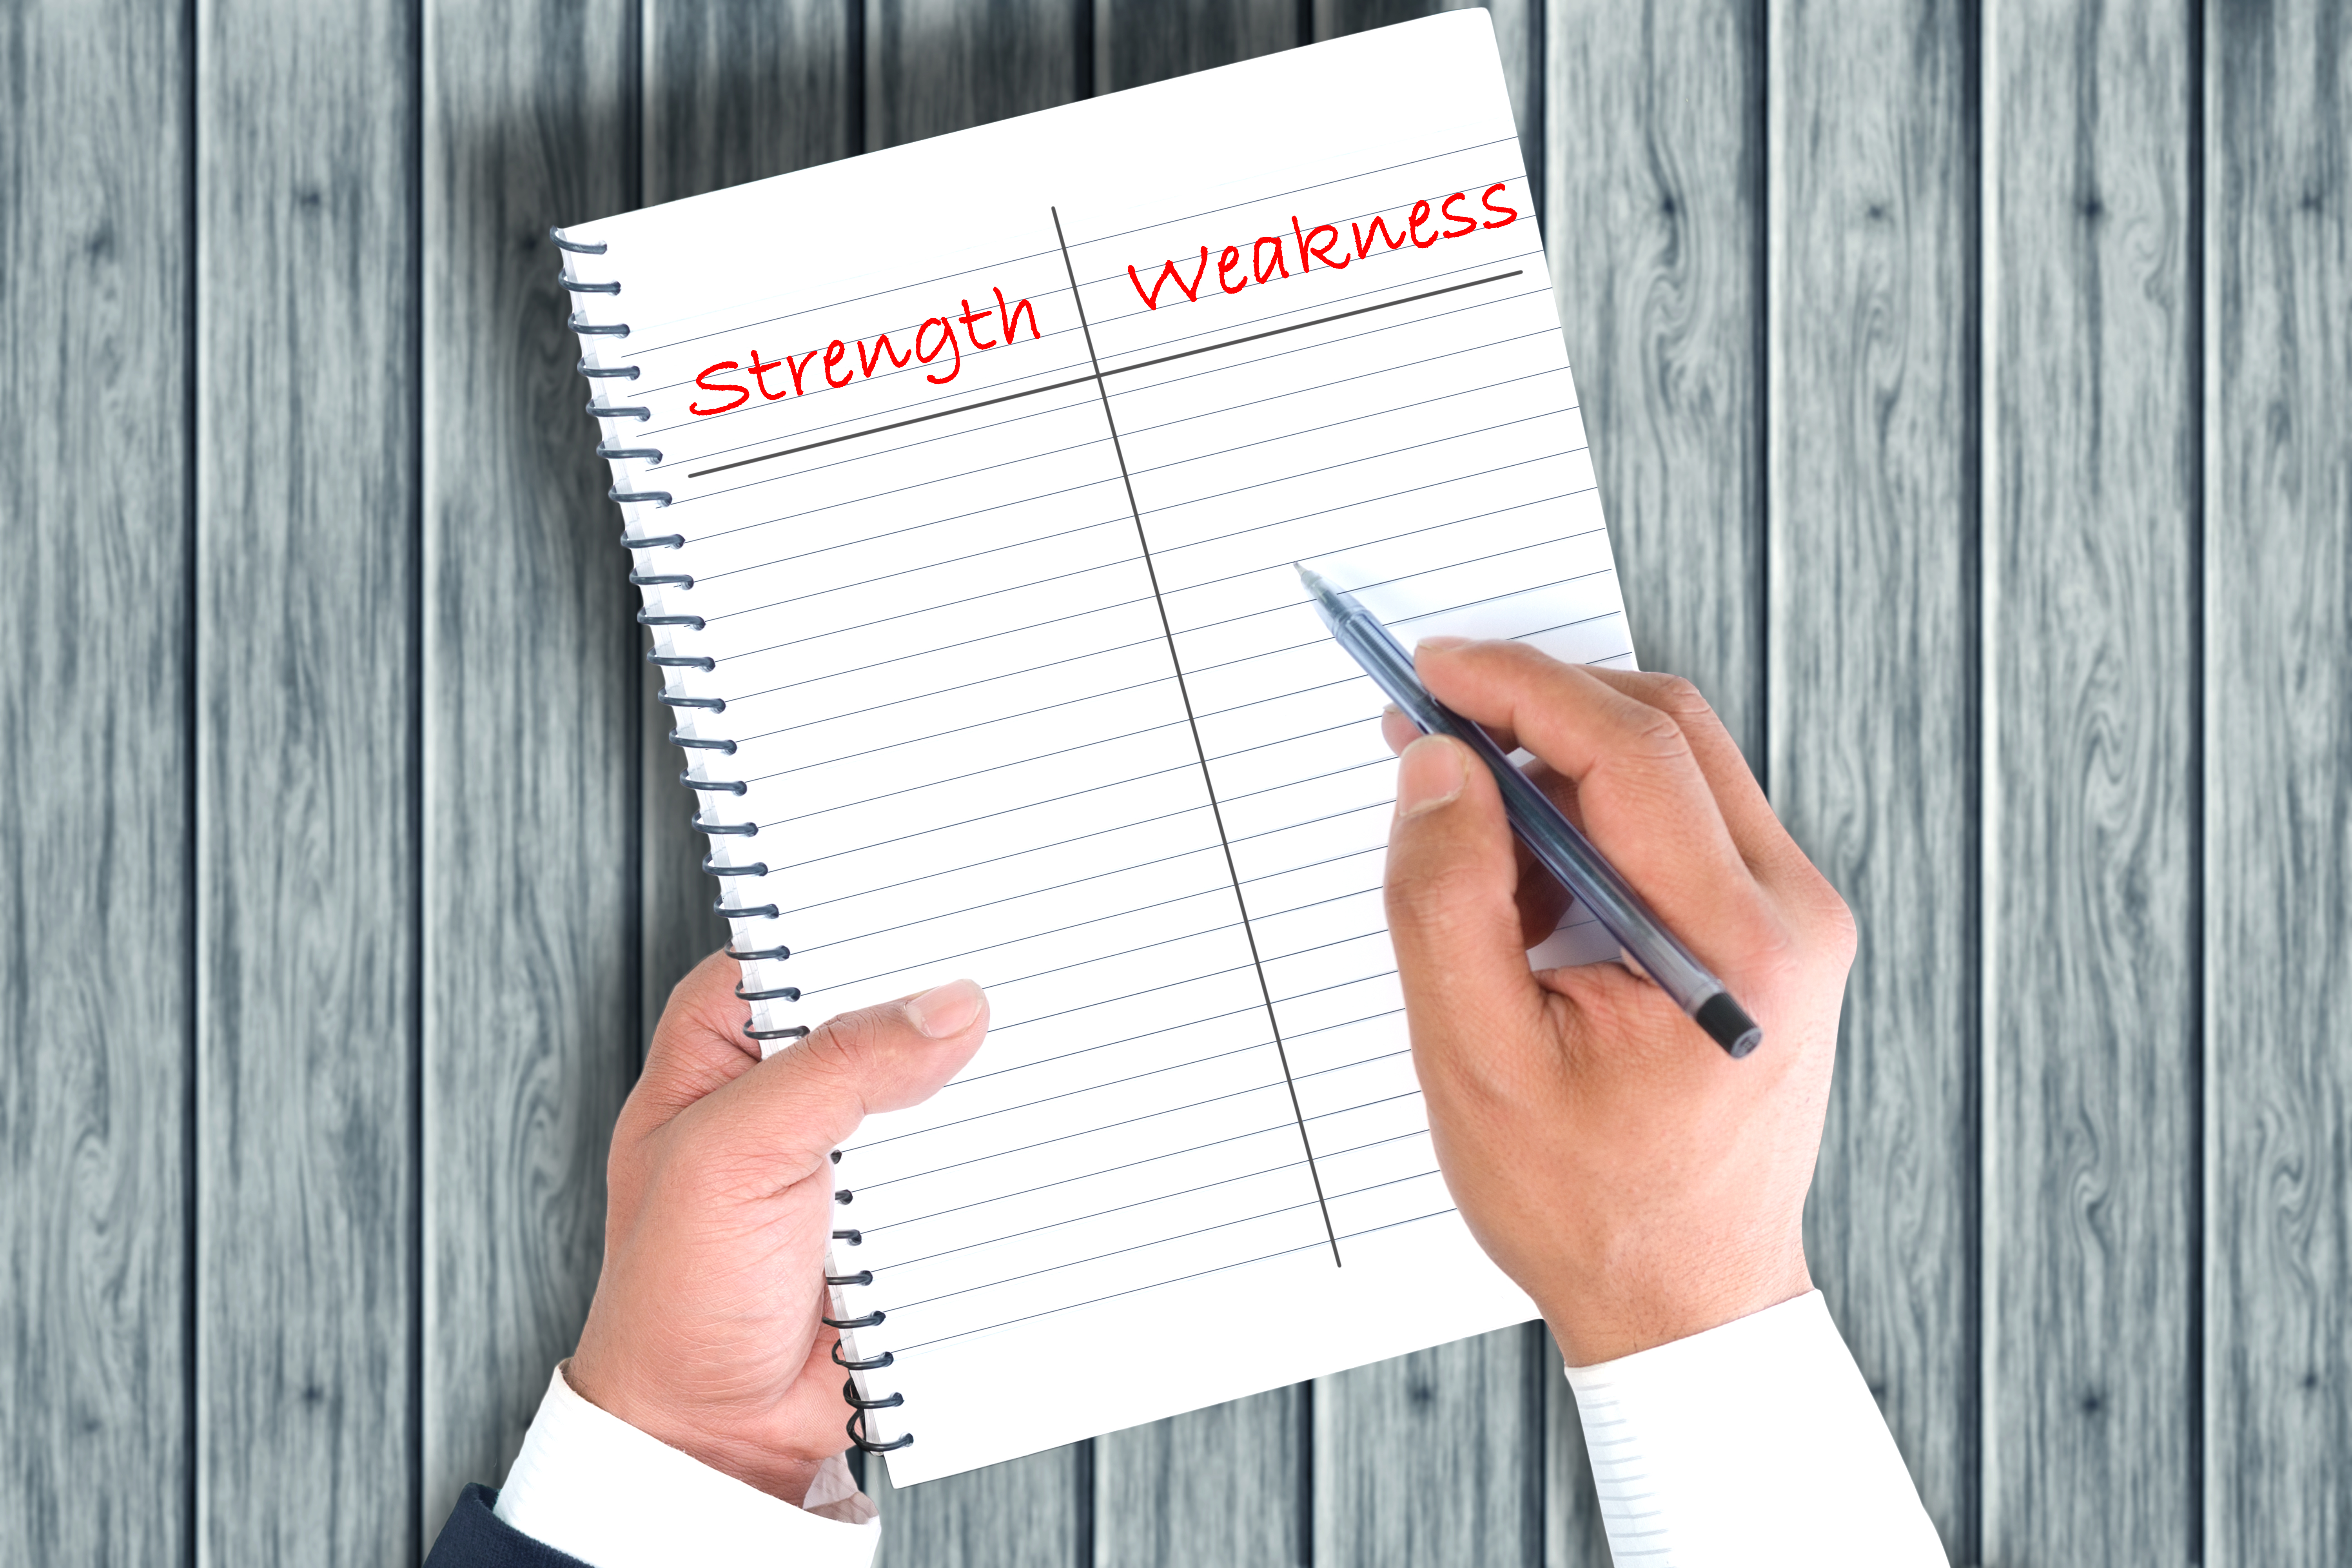 Categorizing Strength and Weakness